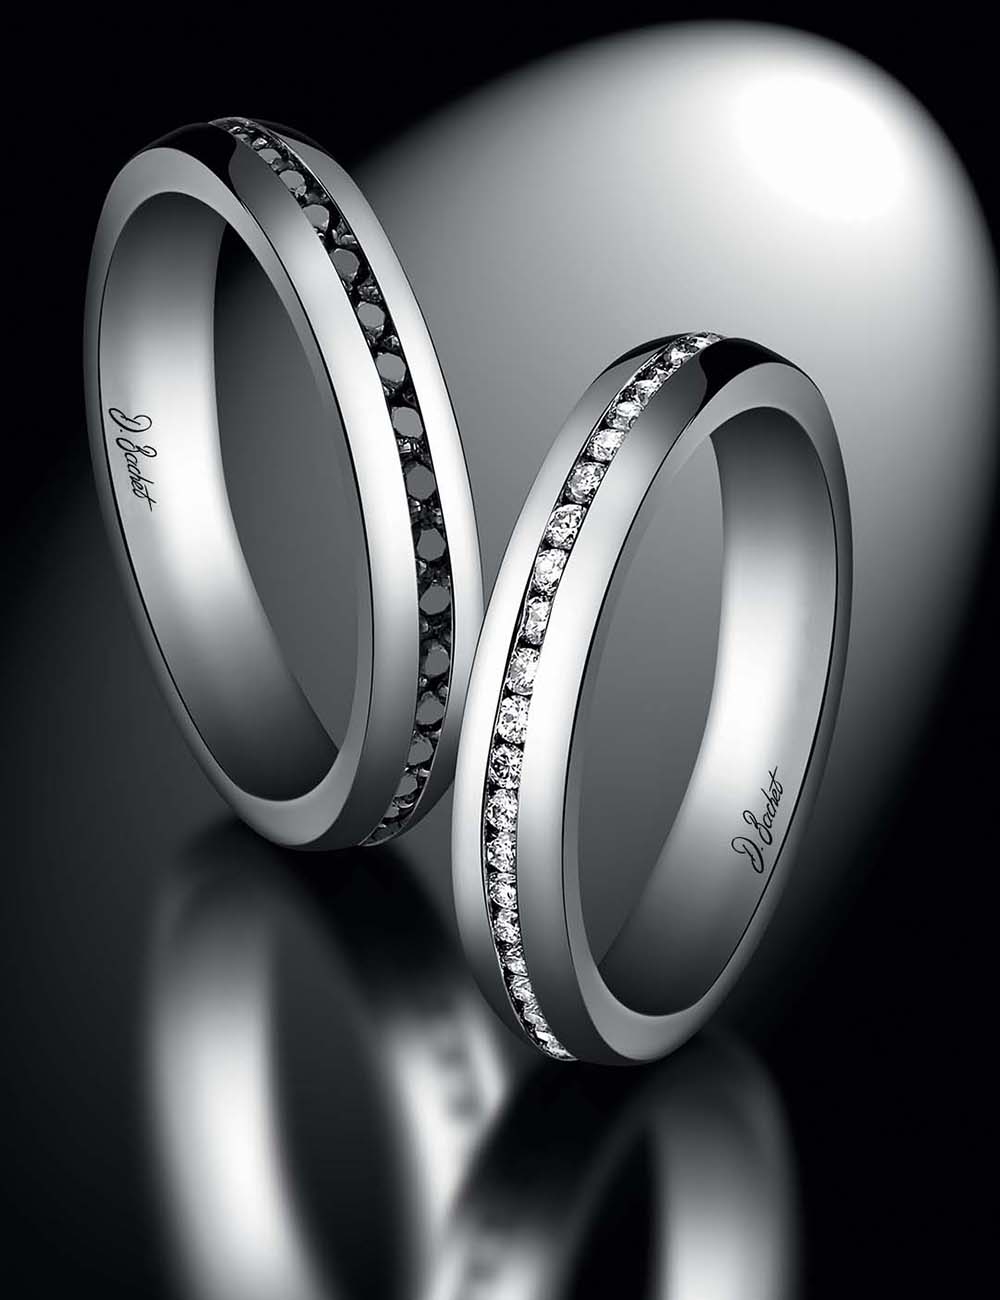 D.Bachet women's wedding band, chic and delicate with white diamonds set in platinum, showcasing timeless and modern elegance.